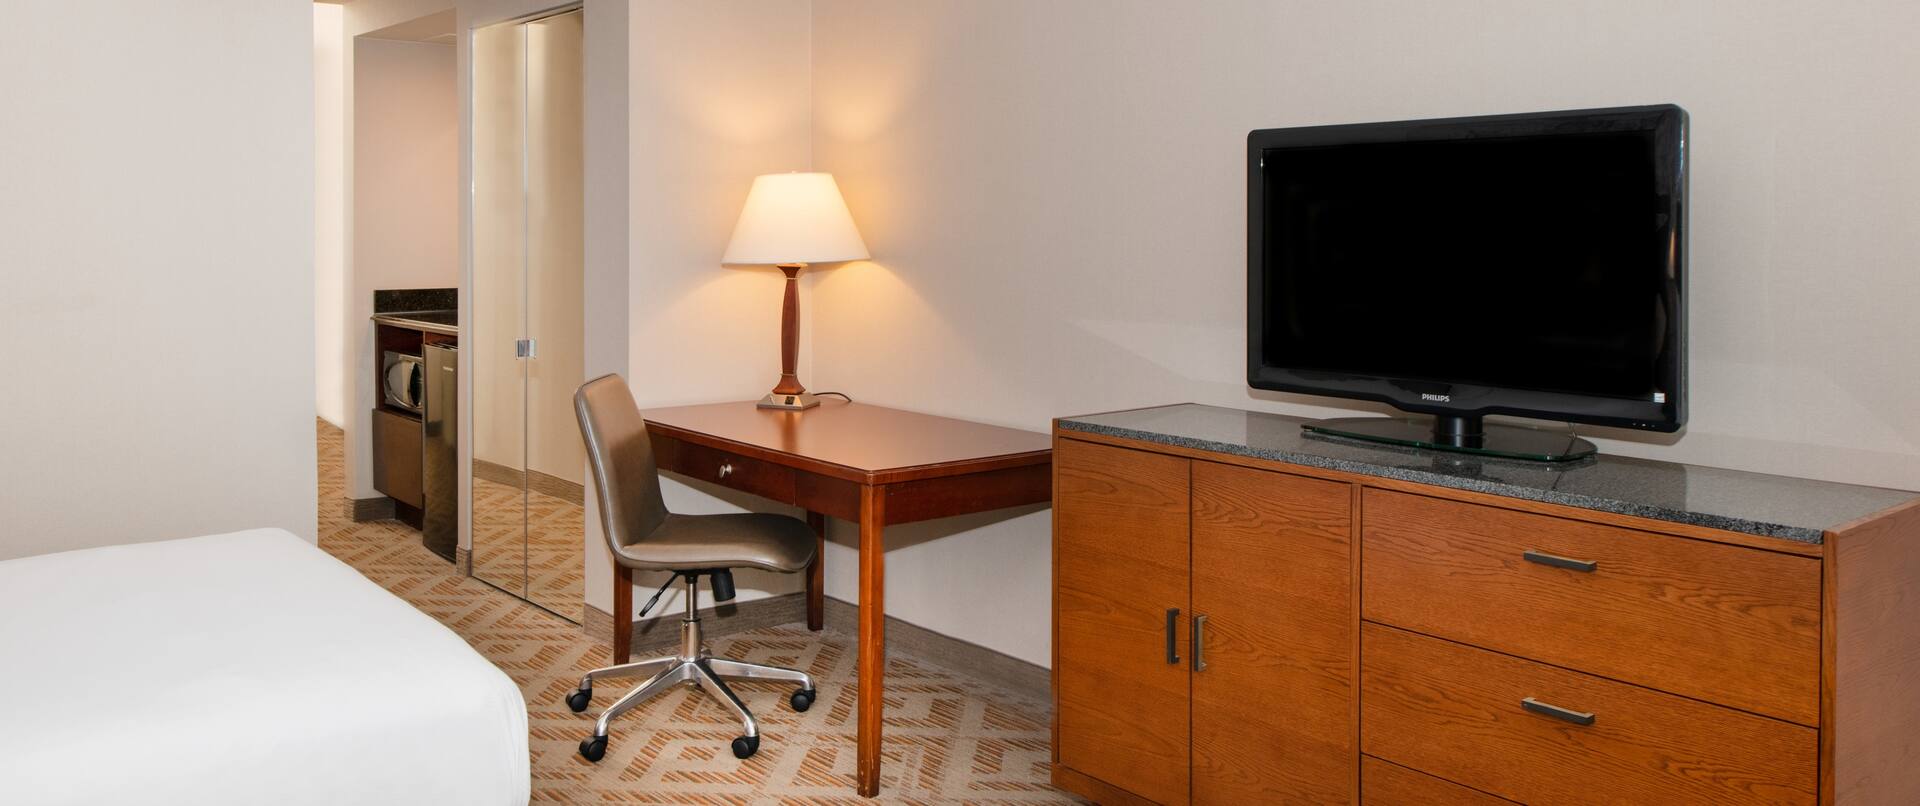 From family vacations to getaways with friends, our rooms are fully equipped for your travel needs.